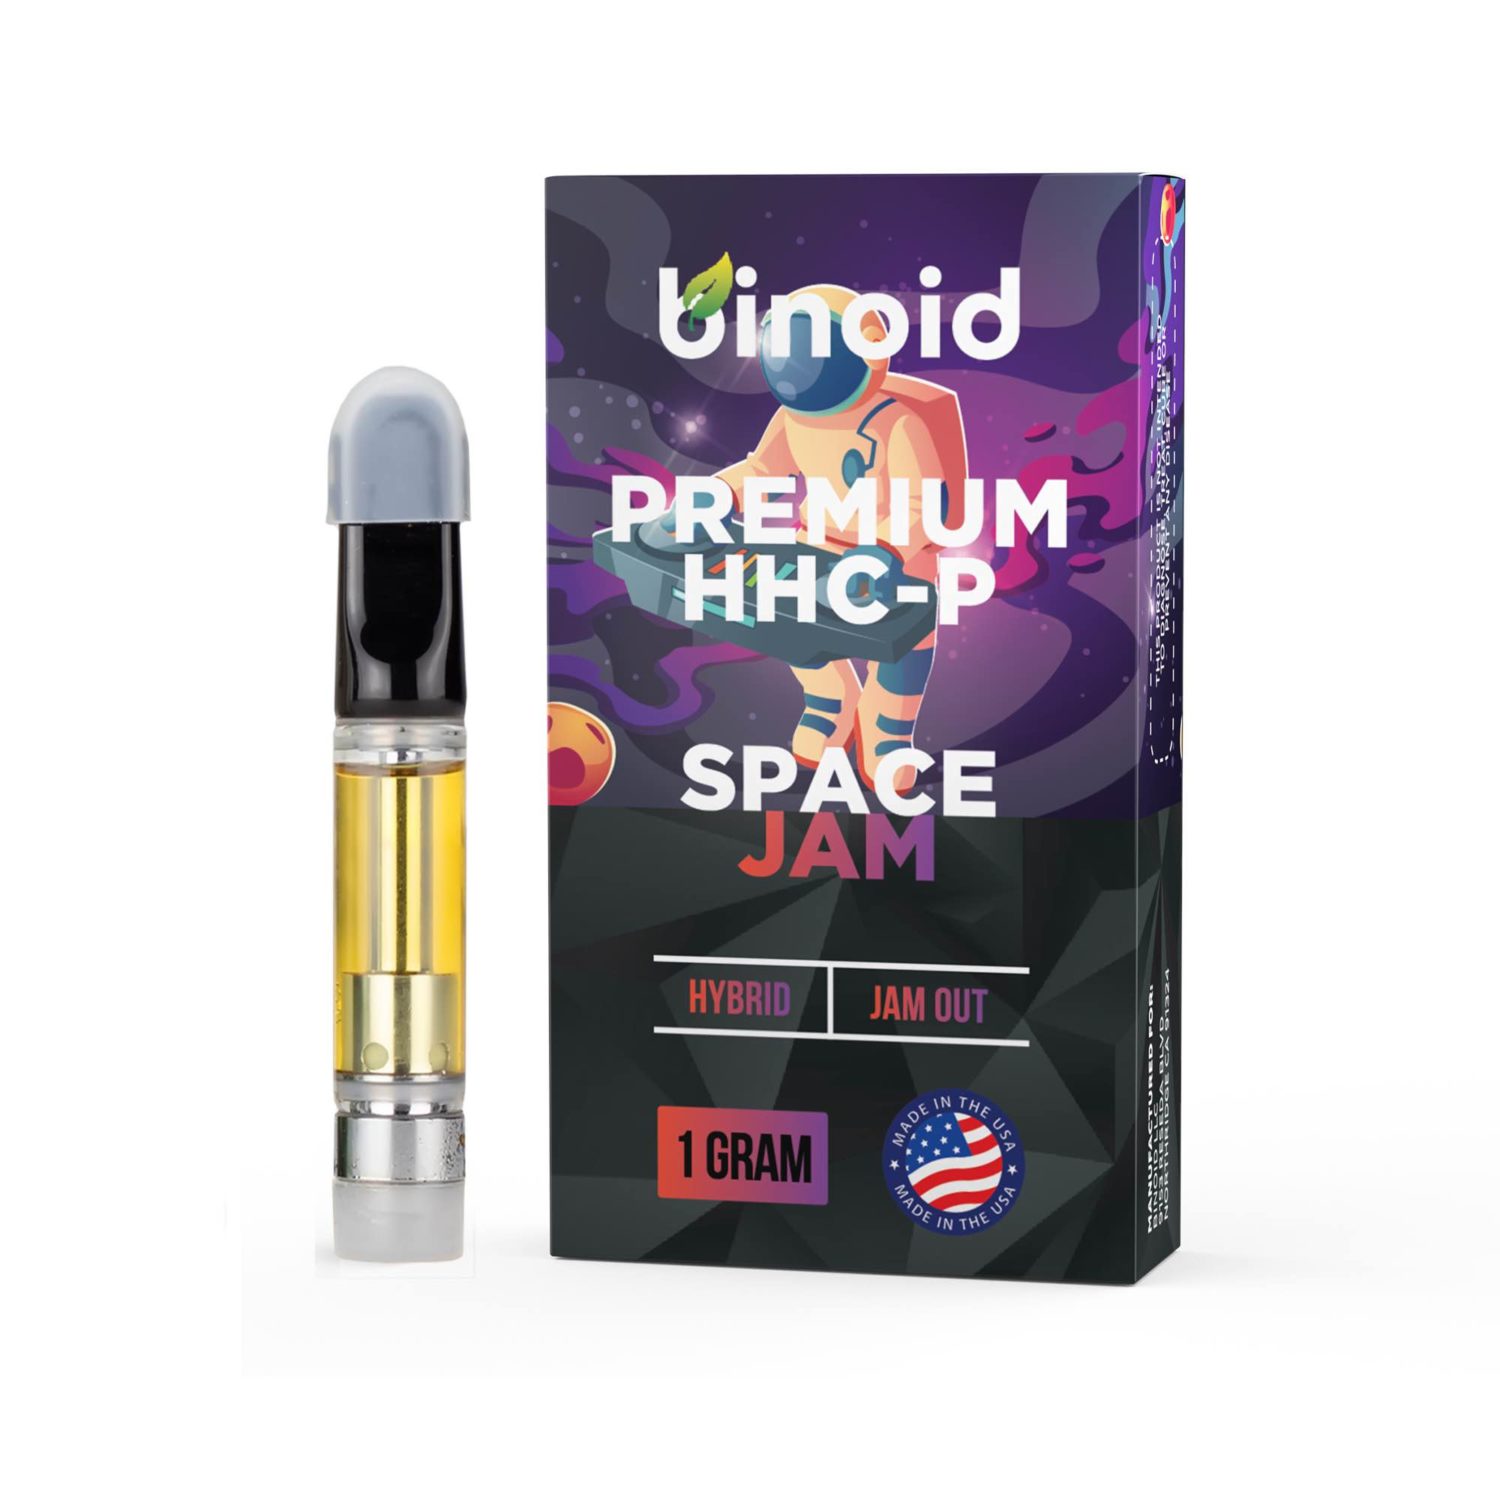 HHCP Vape Cartridge Space Jam Hybrid For Sale Buy Online Benefits Effects Anxiety Sleep Insomnia Pain Best Price Store Shop Near Me